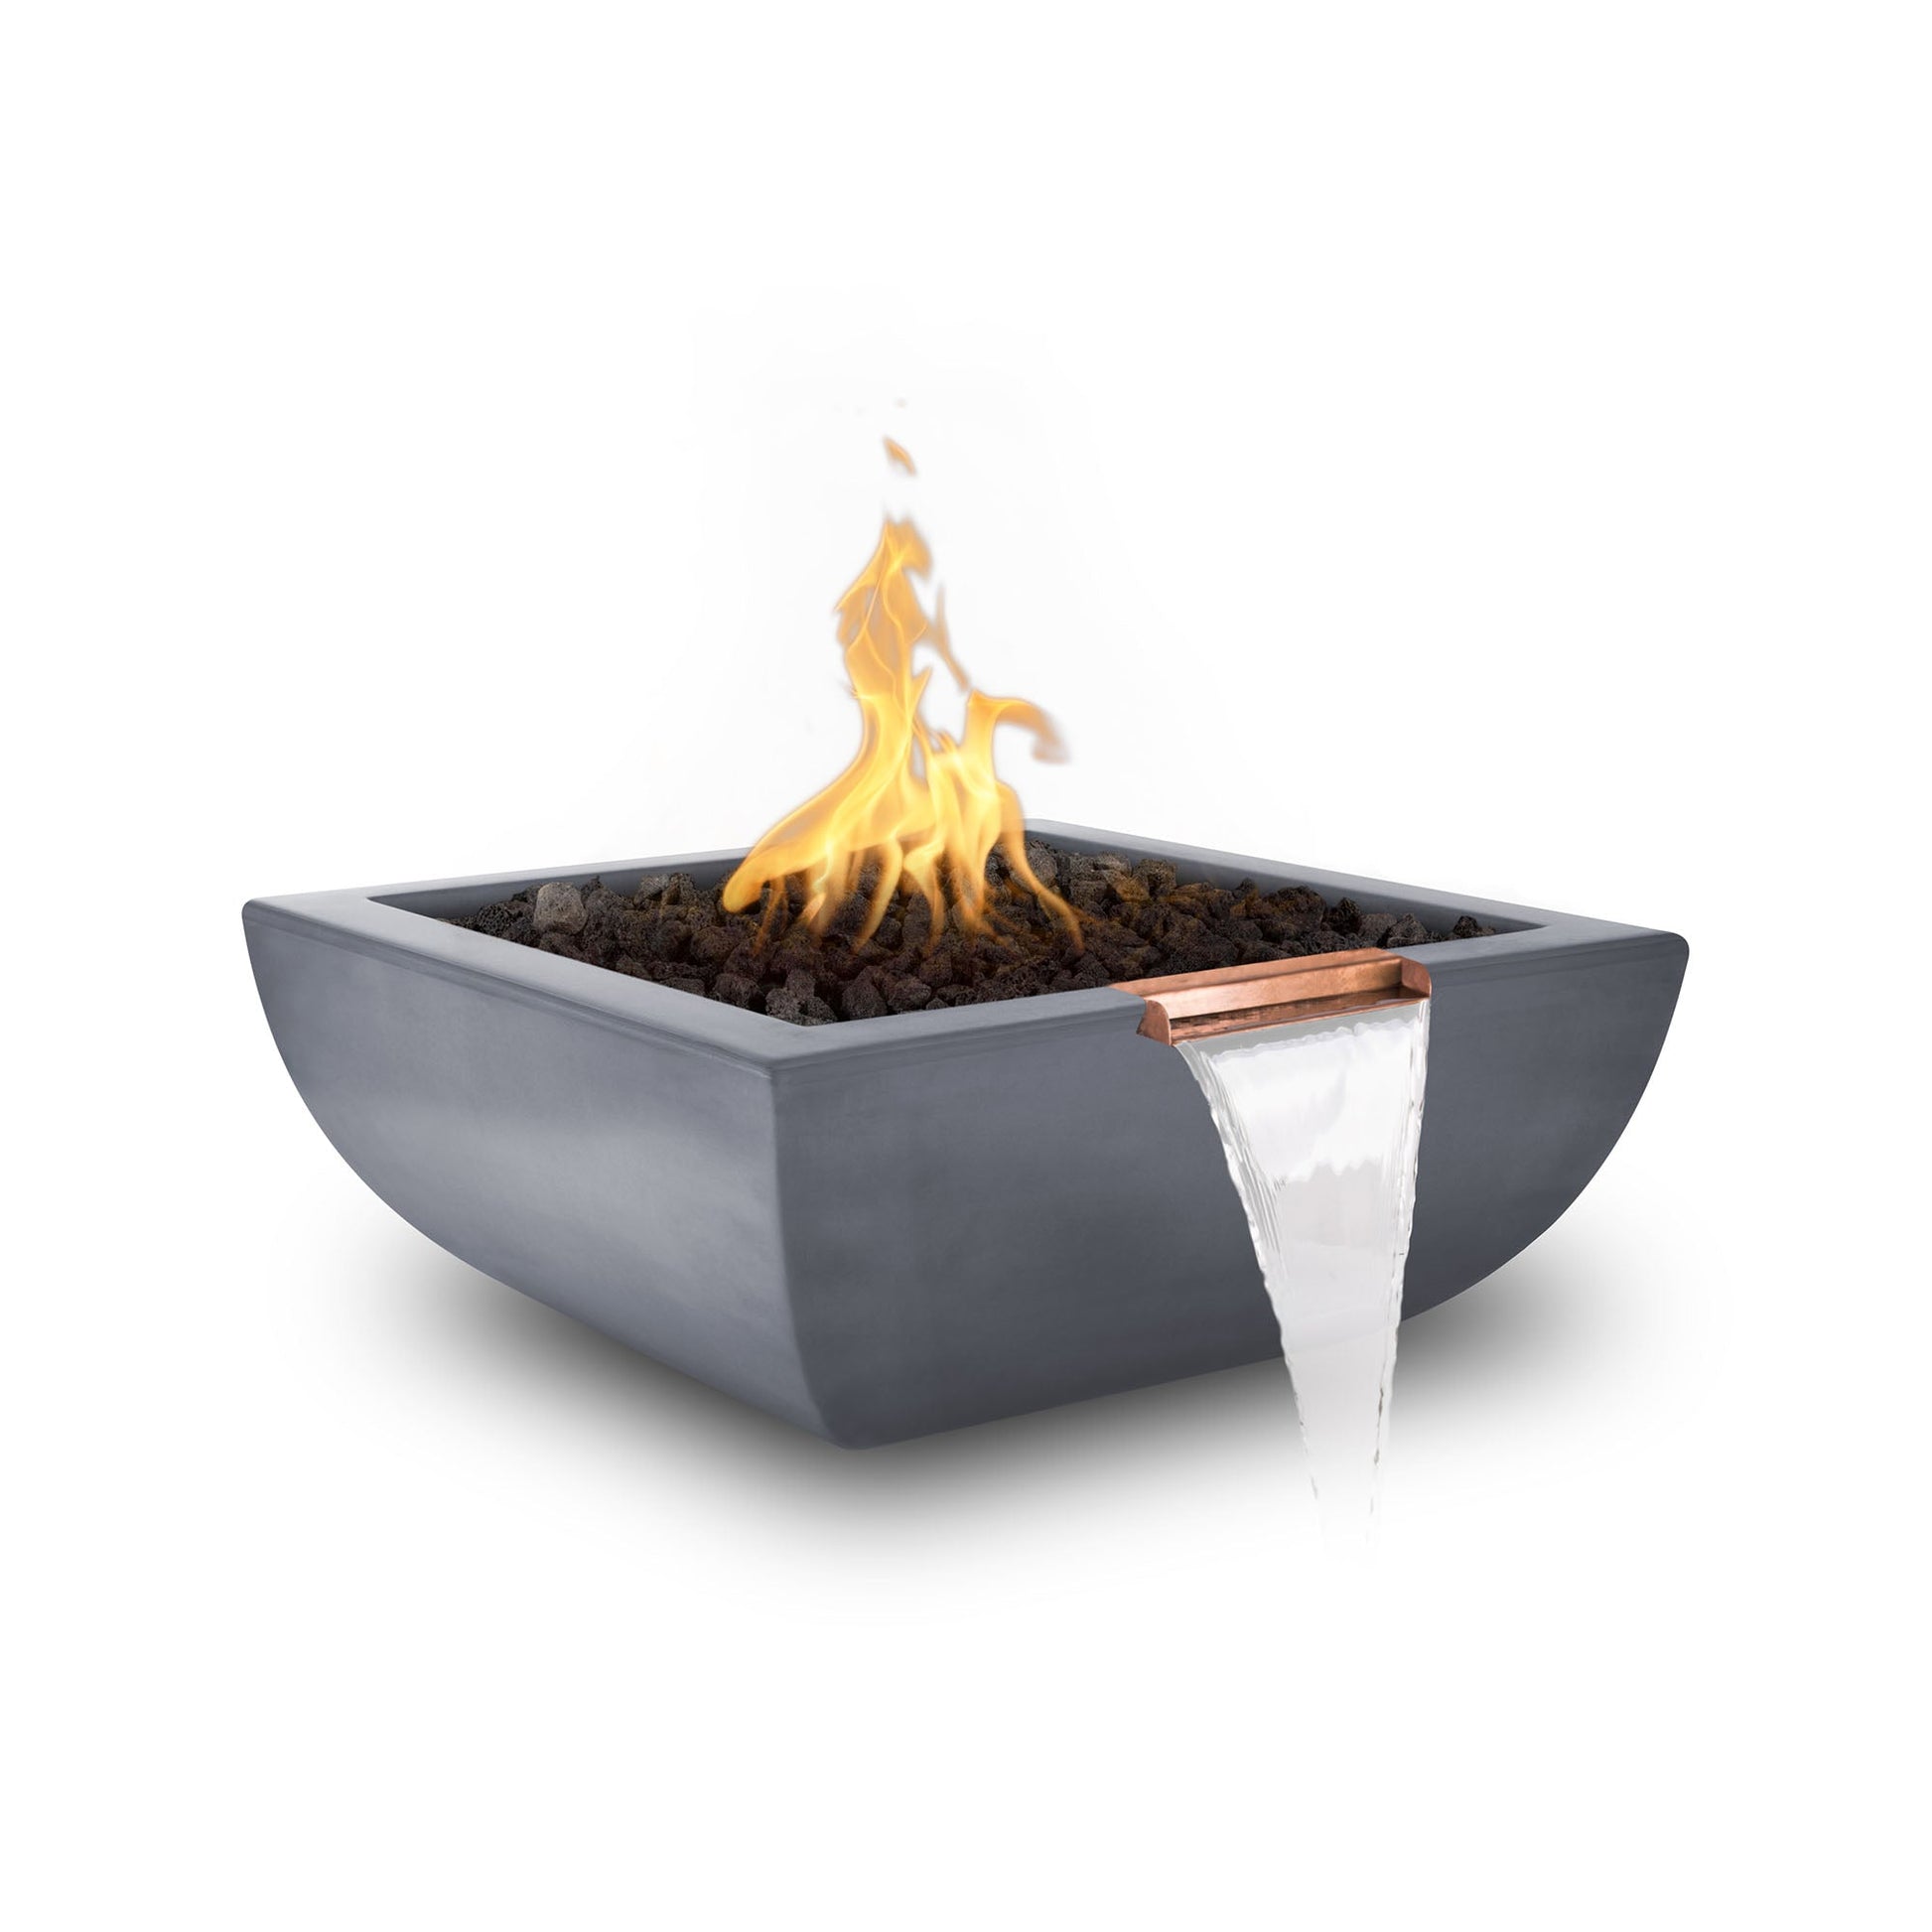 The Outdoor Plus Square Avalon 36" Metallic Silver GFRC Concrete Liquid Propane Fire & Water Bowl with Match Lit with Flame Sense Ignition